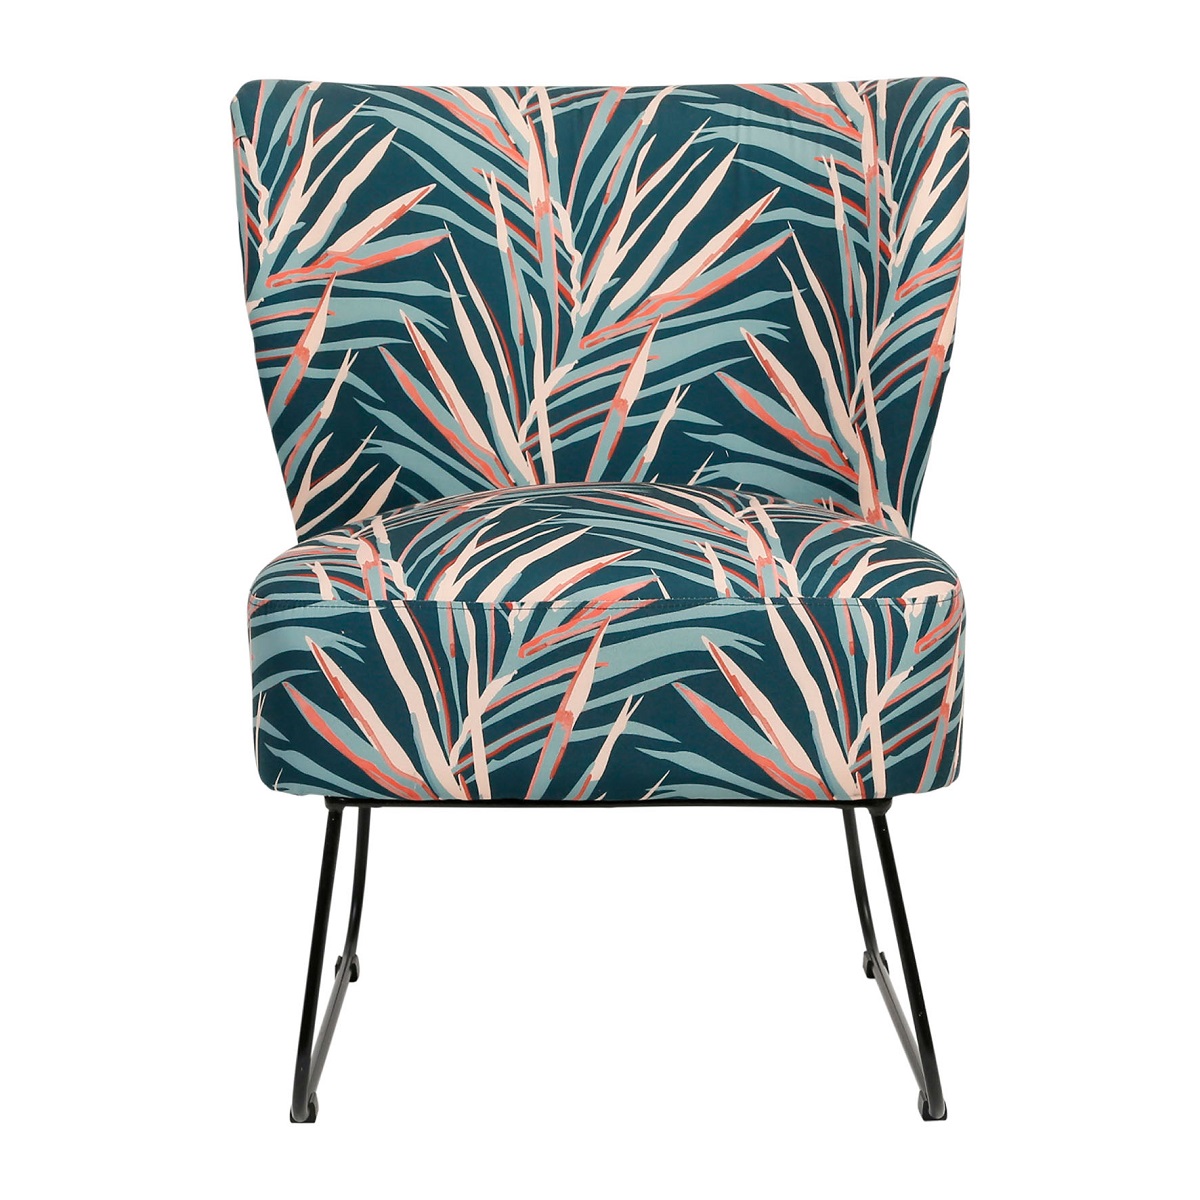 Emerald Chair with Tropical Art